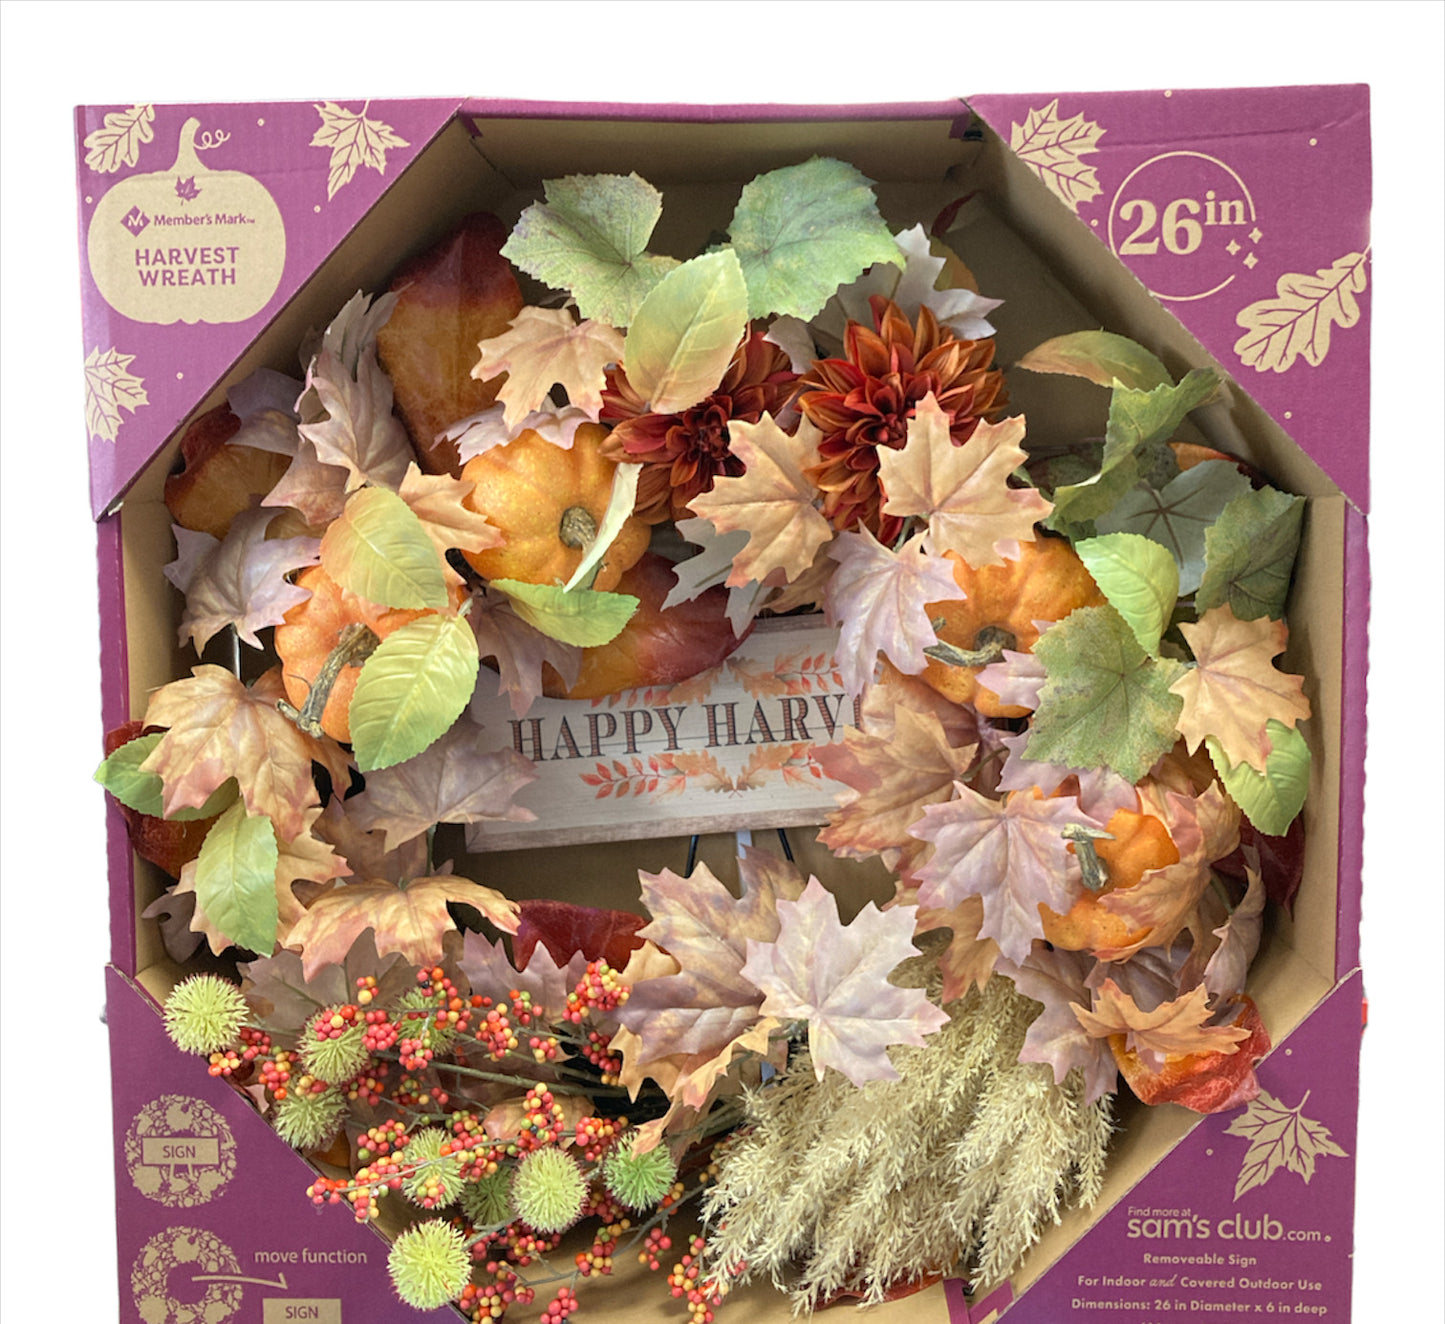 Member's Mark 26" Harvest Wreath - Foliage with Removeable Sign